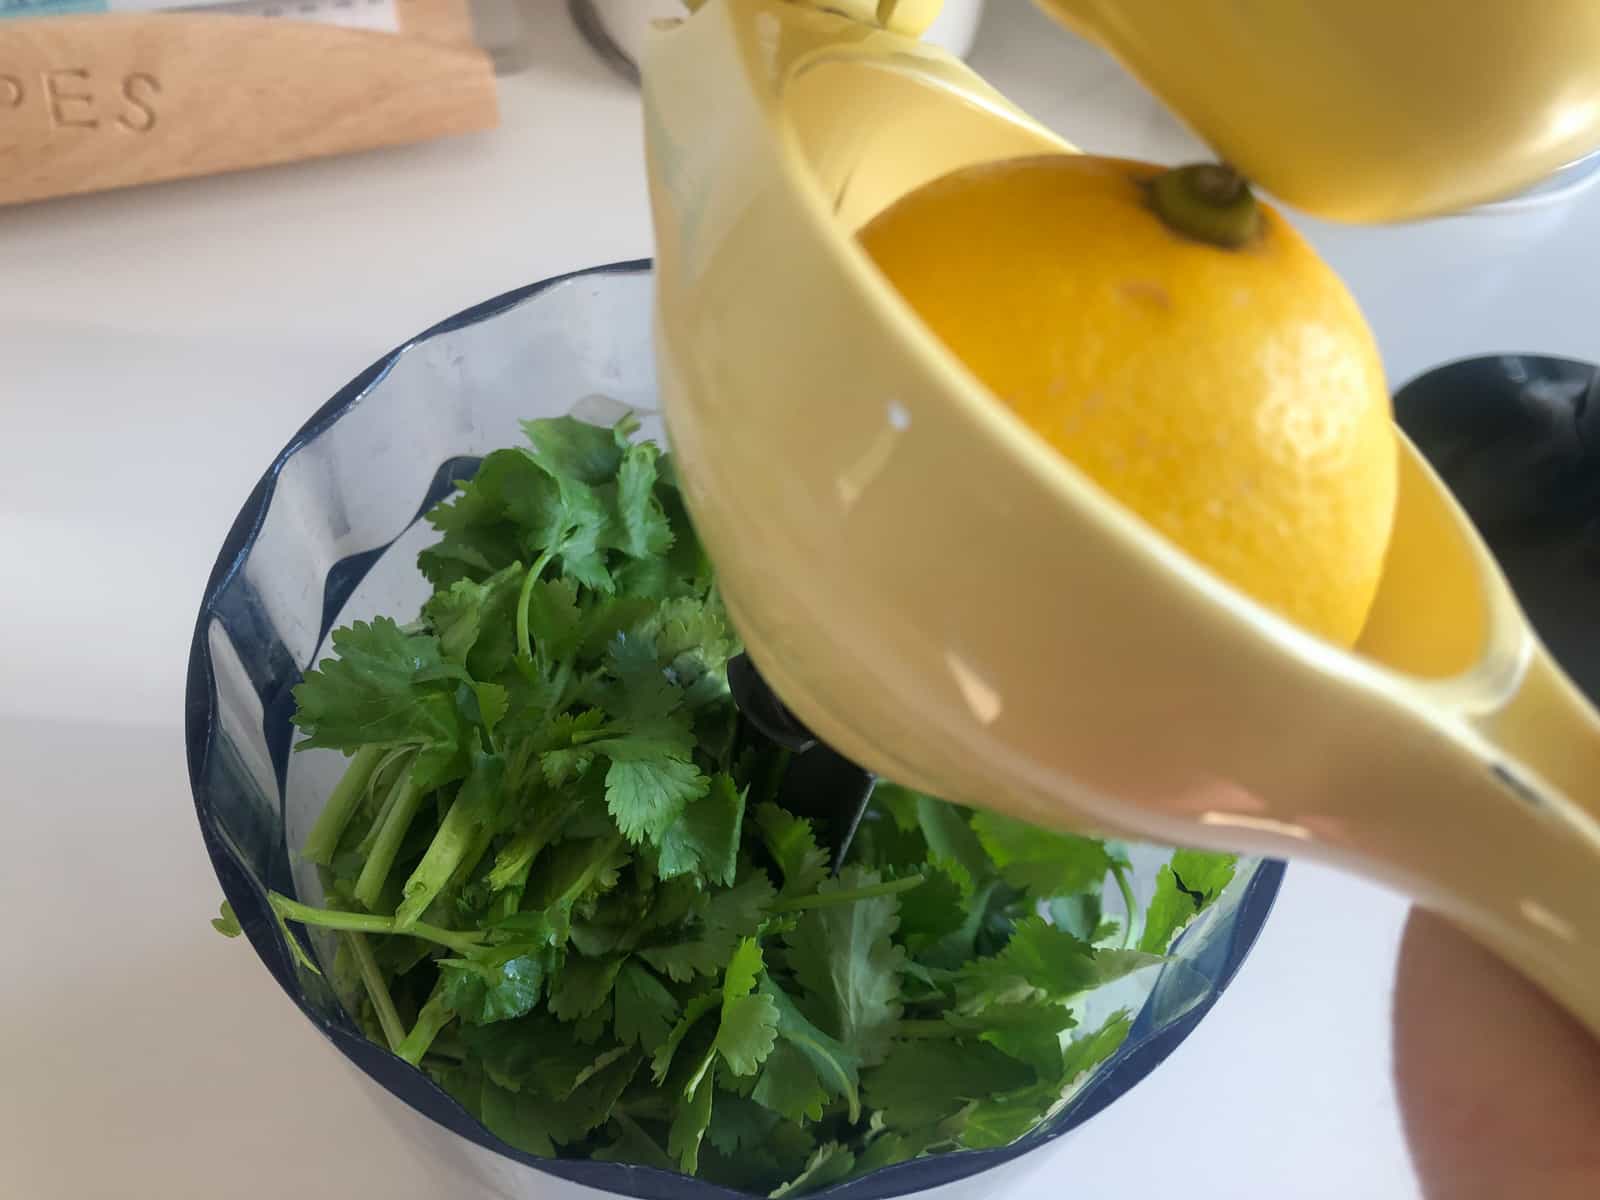 Fresh lemon juice squeezed into a small blender of fresh herbs.